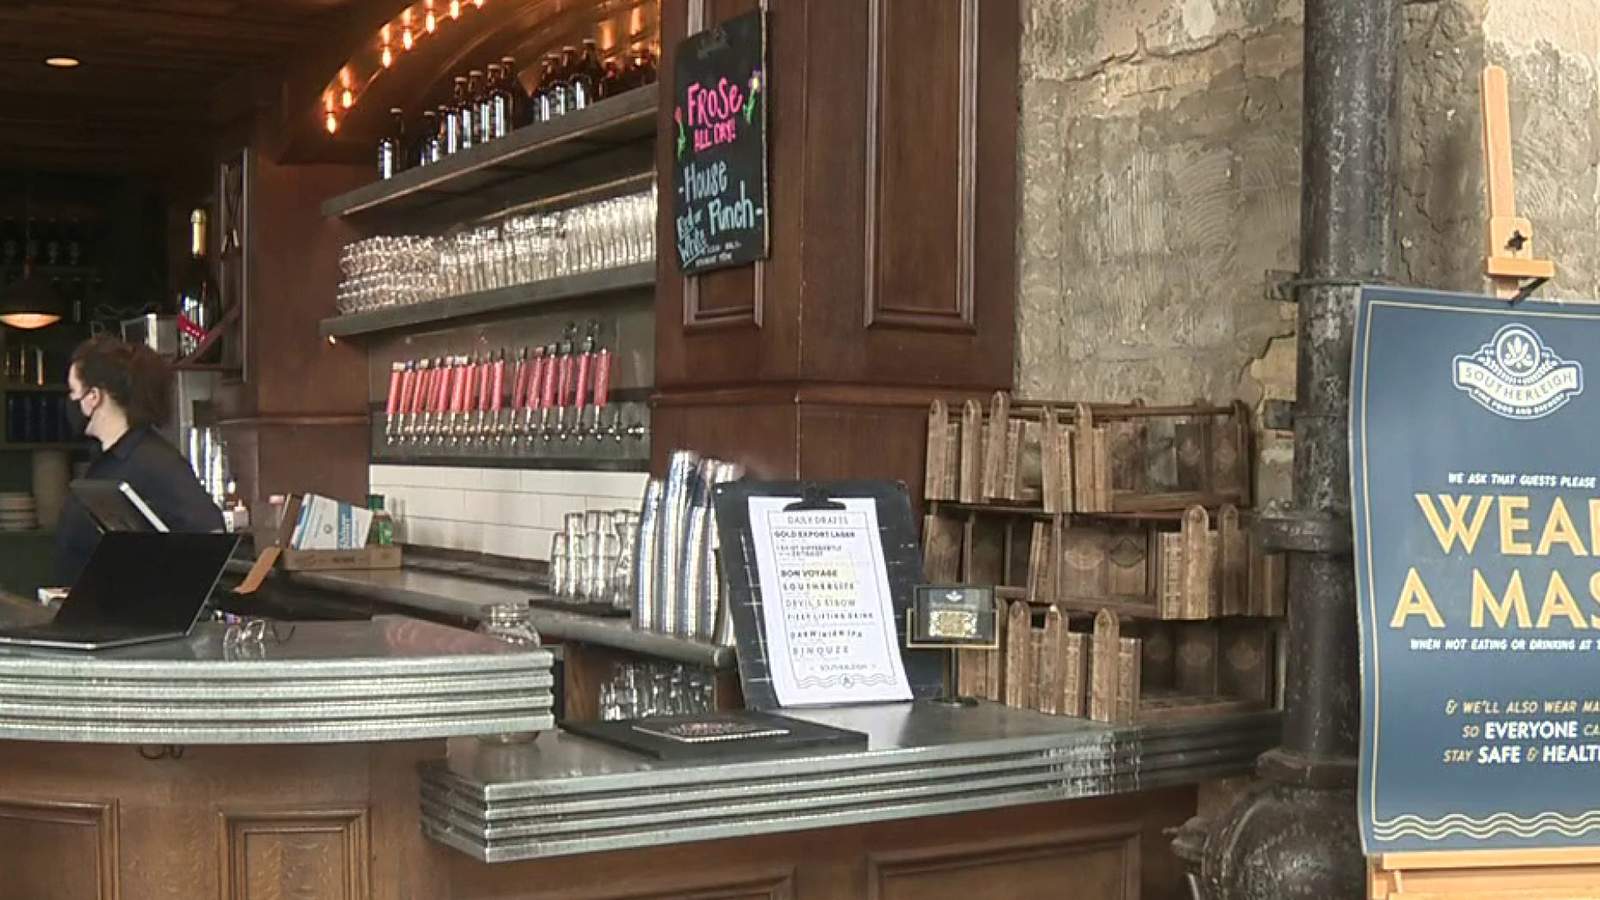 San Antonio business owners share split opinions on lifting mask mandate